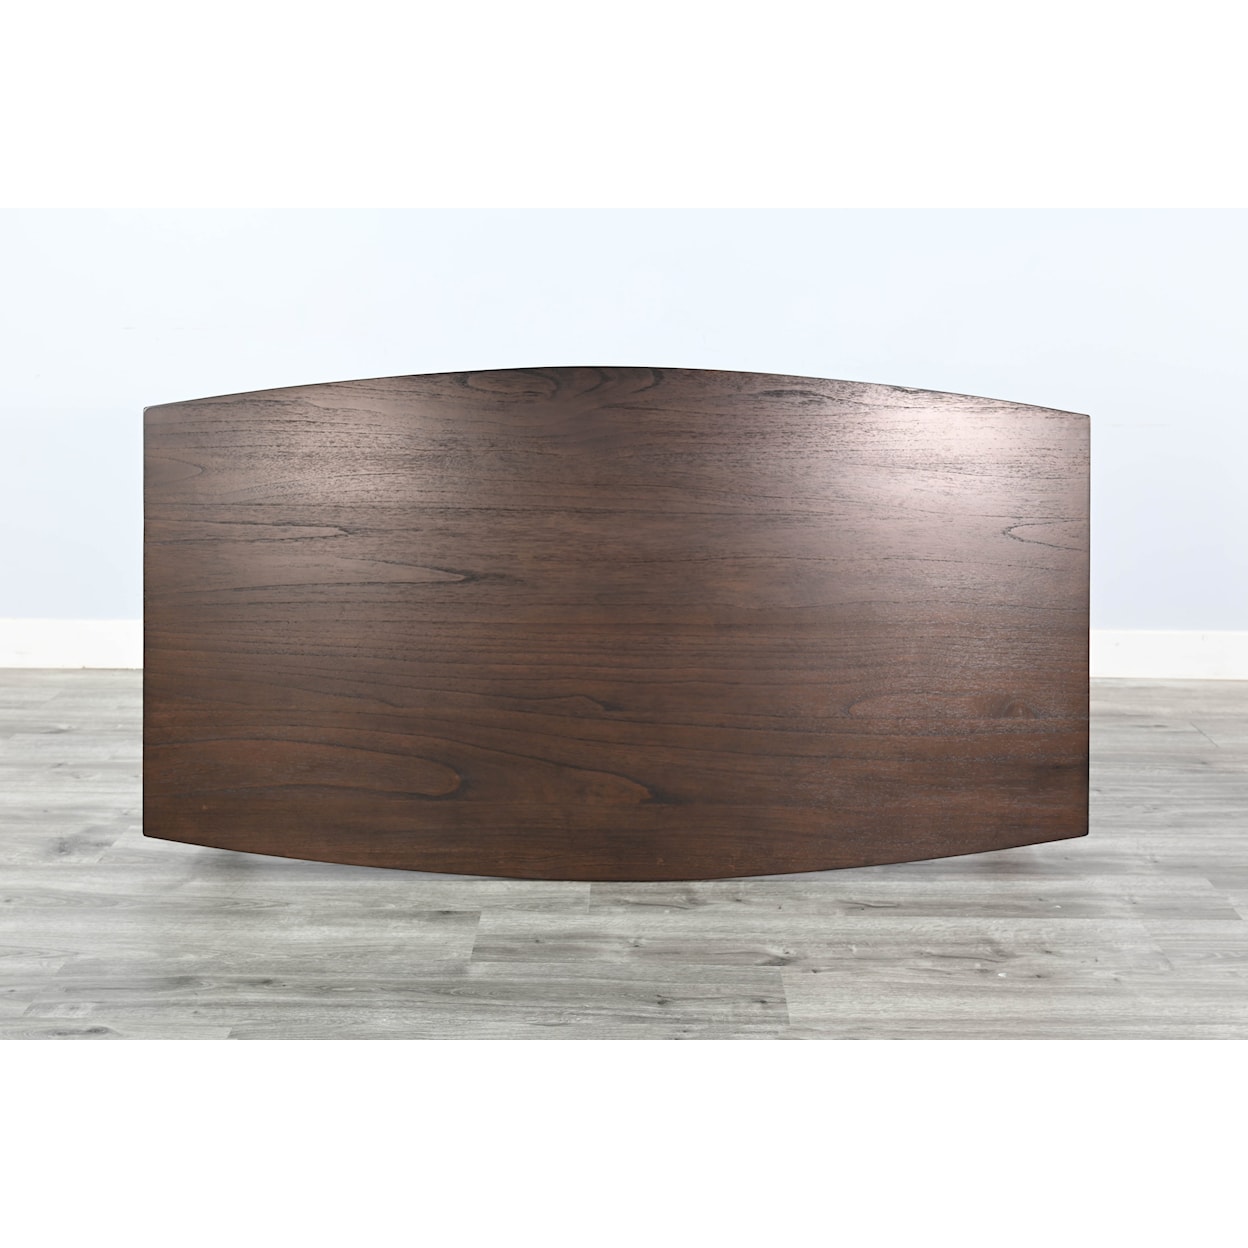 Sunny Designs American Modern Mid-century Wood Dining Table